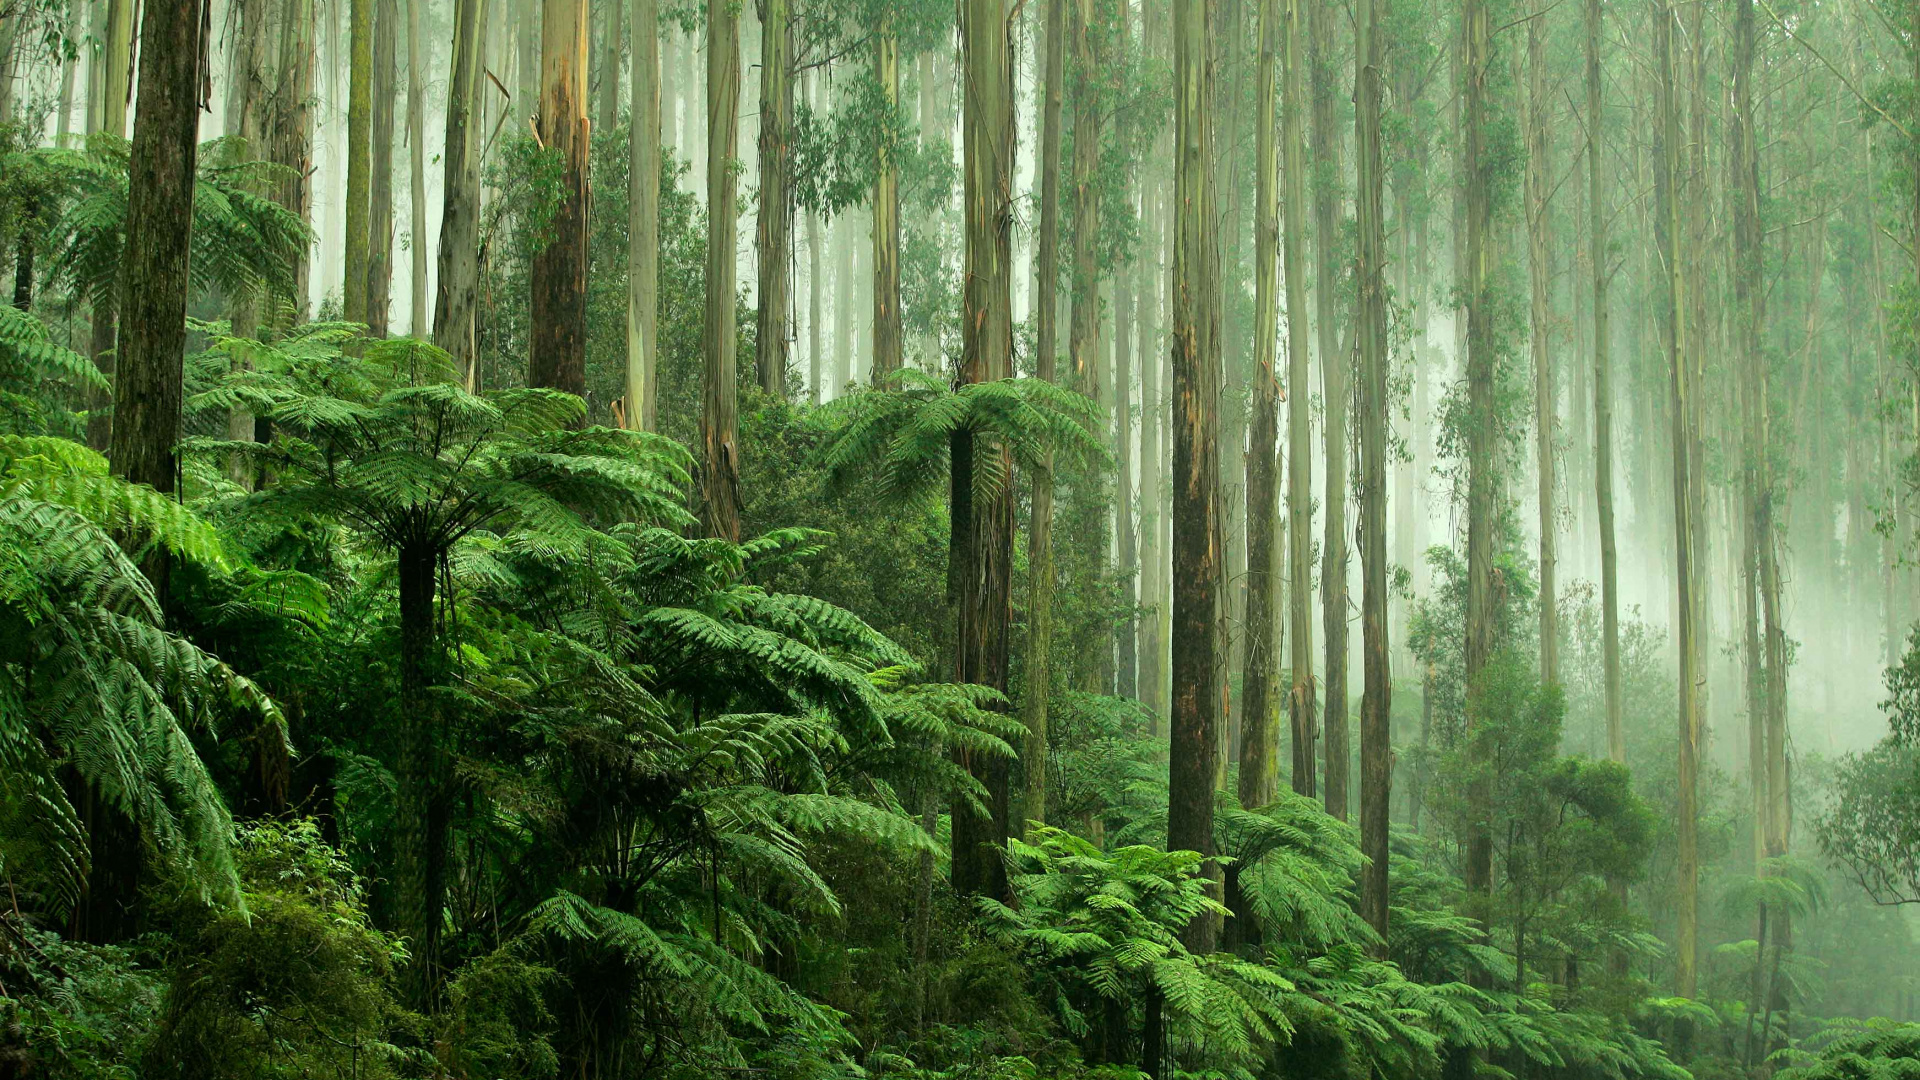 Green Plants and Trees During Daytime. Wallpaper in 1920x1080 Resolution